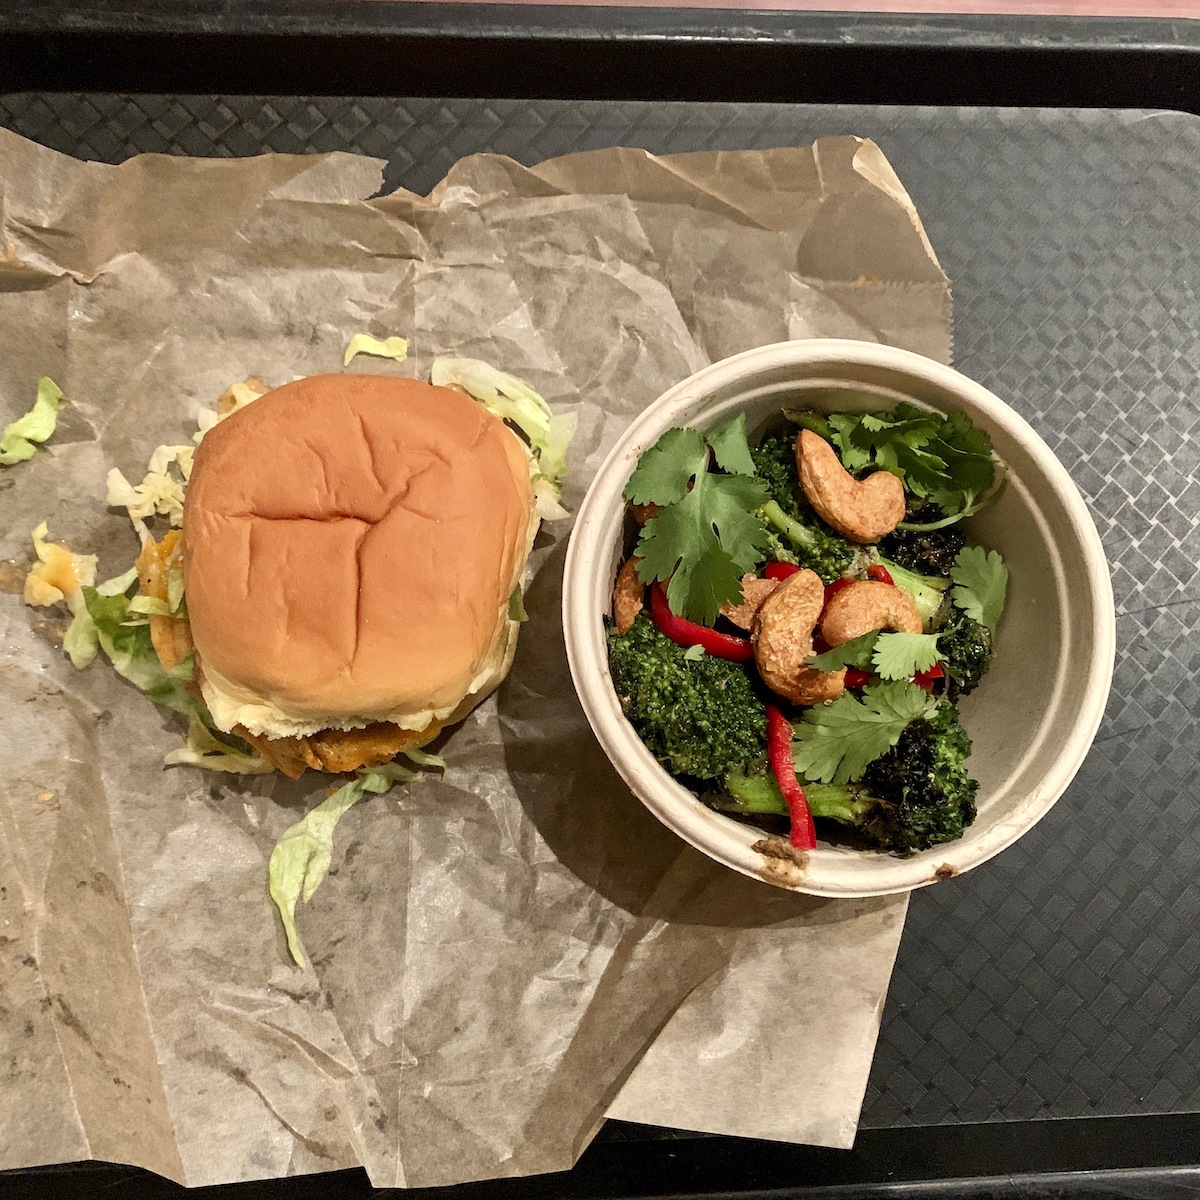 Overhead shot of a vegetarian hamburger on paper wrapping and a small salad in a bowl